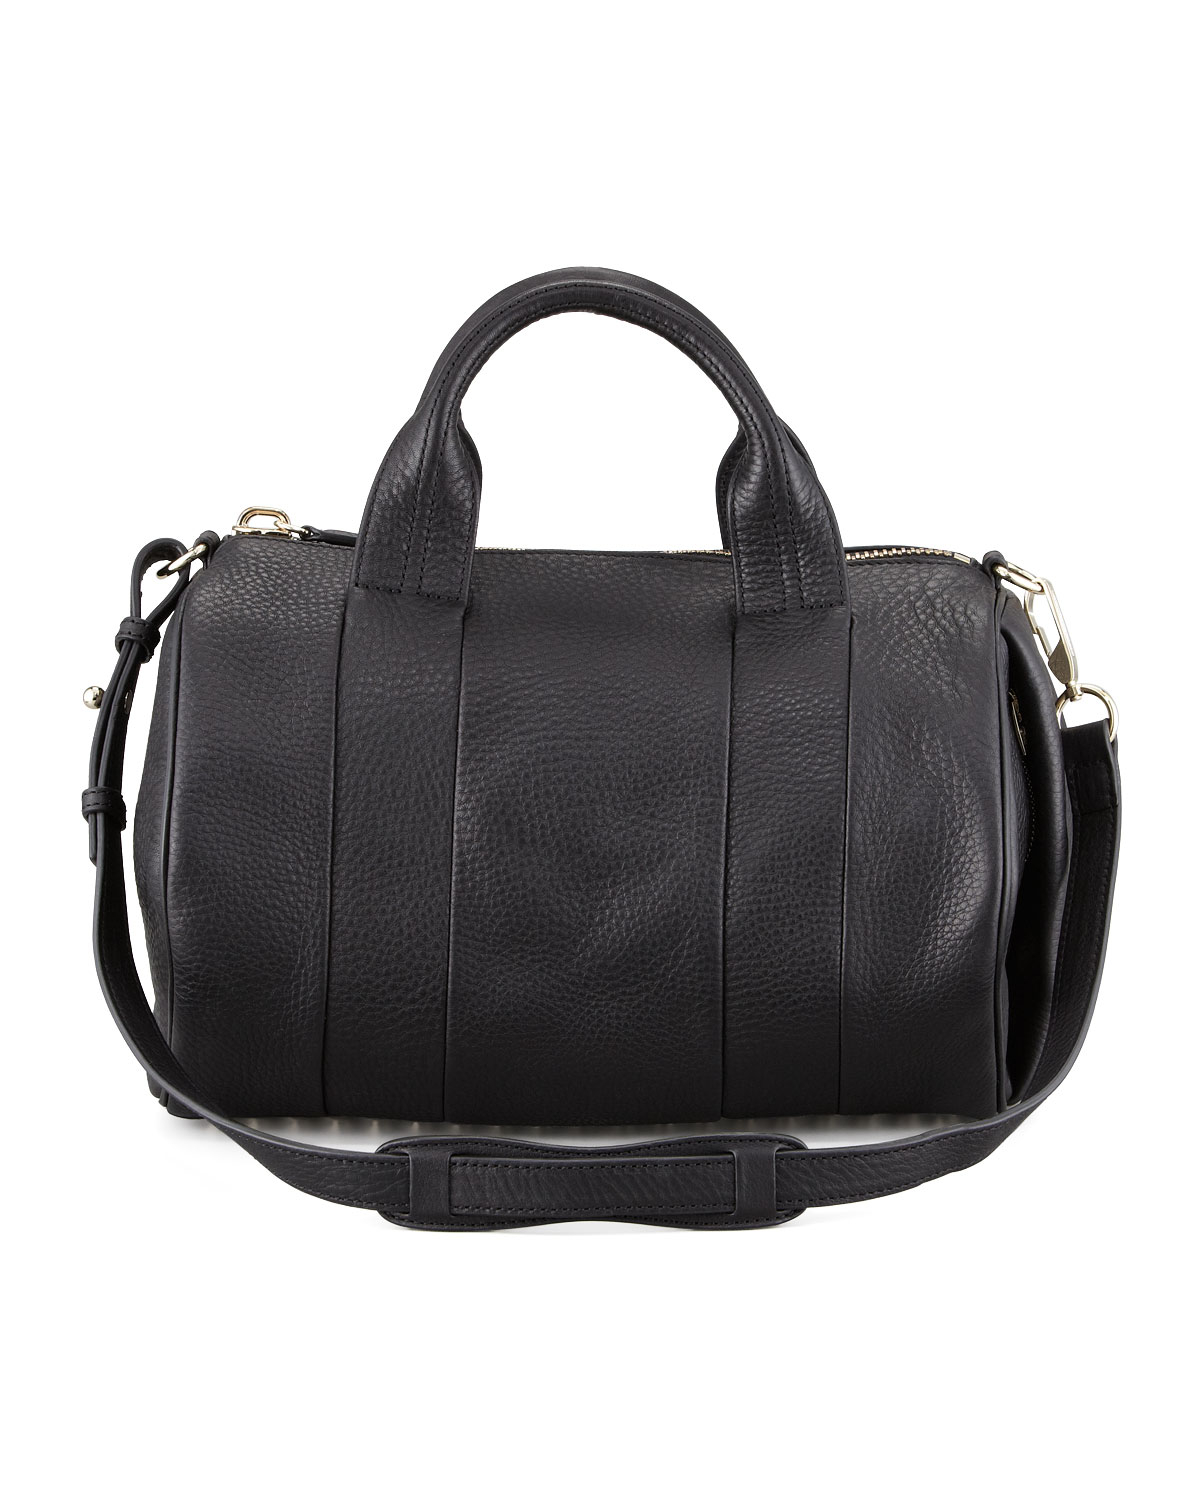 Alexander Wang Rocco Leather Satchel Bag Blackpale Gold in Black | Lyst